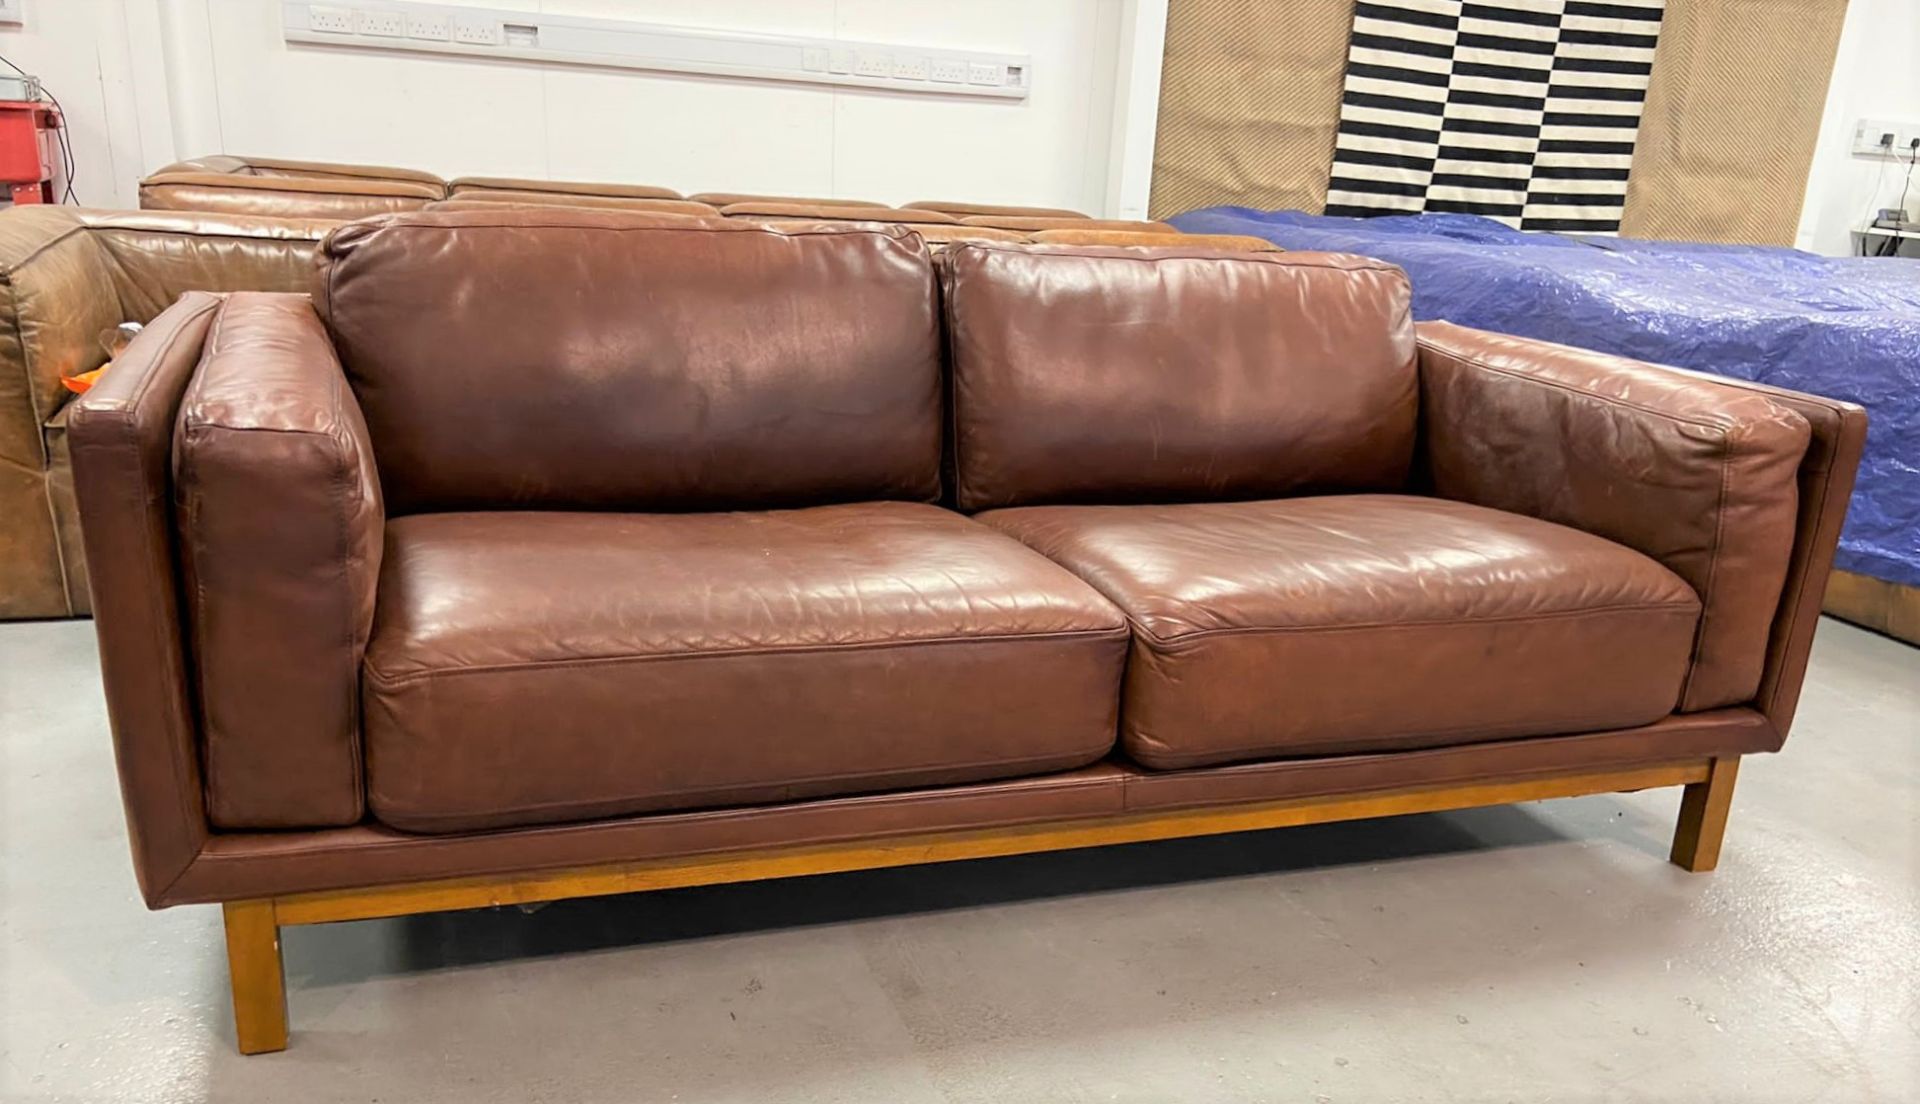 1 x West Elm Dekalb Contemporary Three Seater Sofa - Upholstered in Quality Tan Leather With Oak Fee - Image 4 of 6